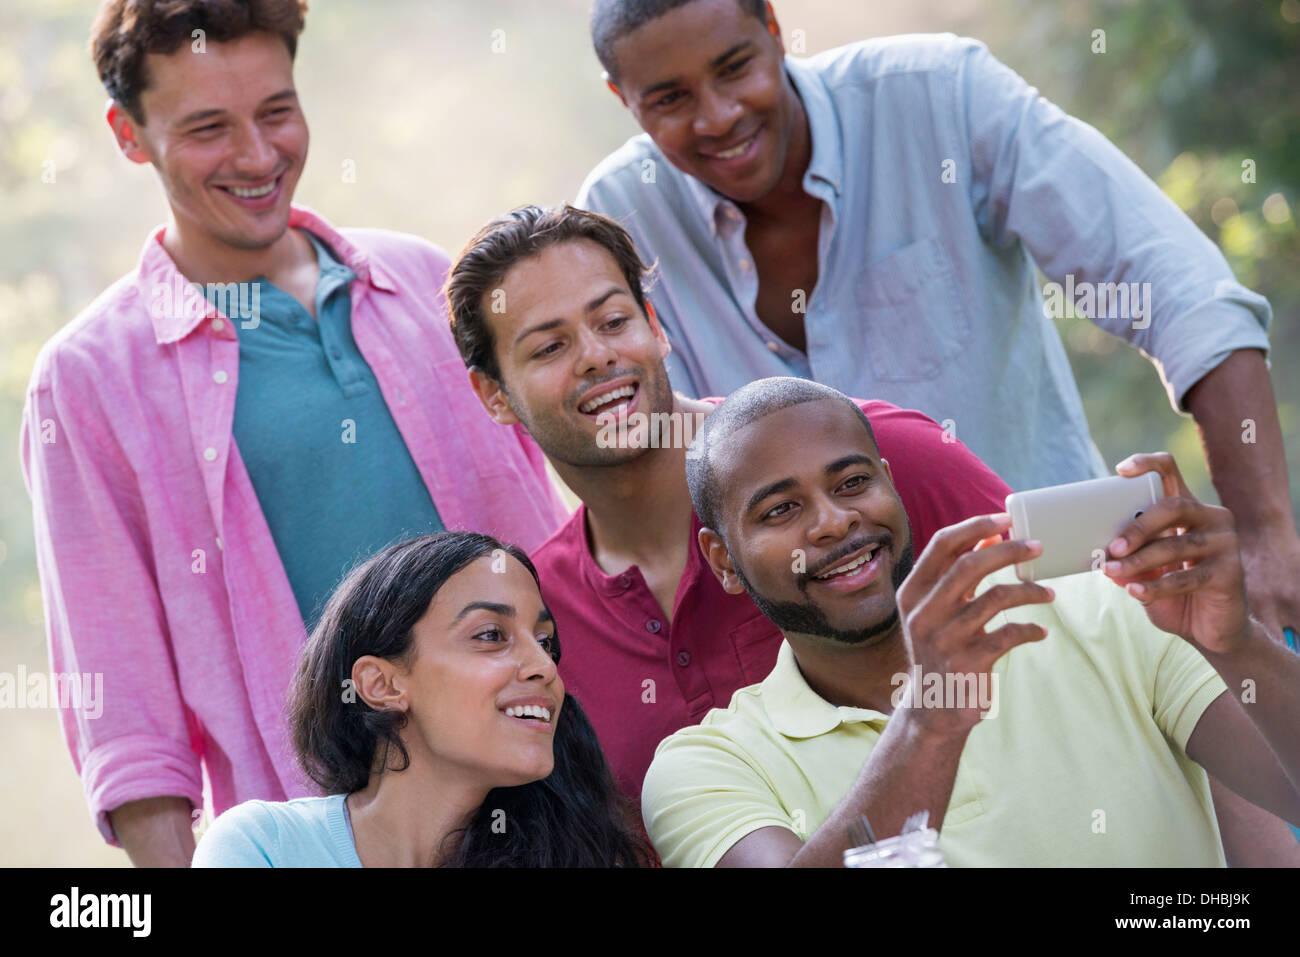 A group of people having a meal outdoors, a picnic. Men and women. Stock Photo